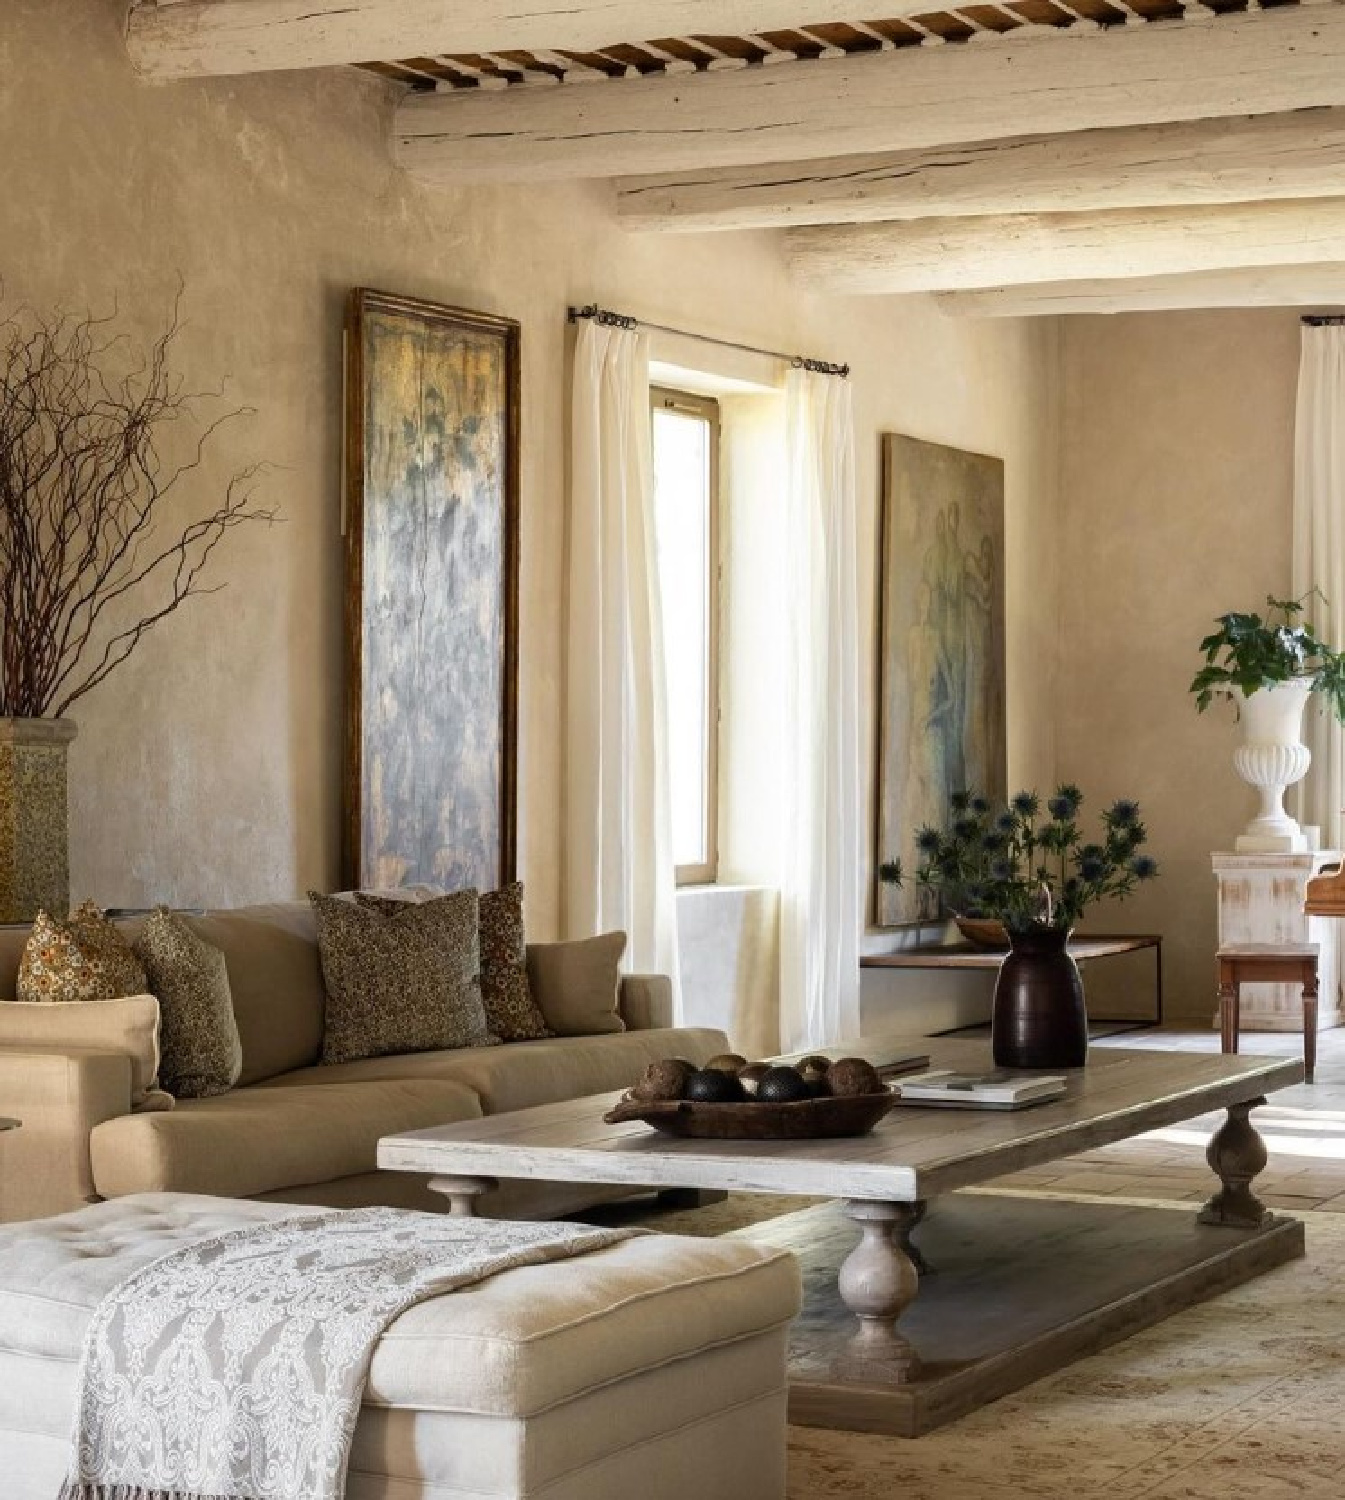 French country parlor. Warm European luxury and cozy opulence in a French vacation villa in Provence - La Bastide de Laurence. #frenchbastide #frenchvilla #luxuryvilla #provencevilla #warmeuropeanluxury #cozyopulence #provencehomes #frenchcountryinterior